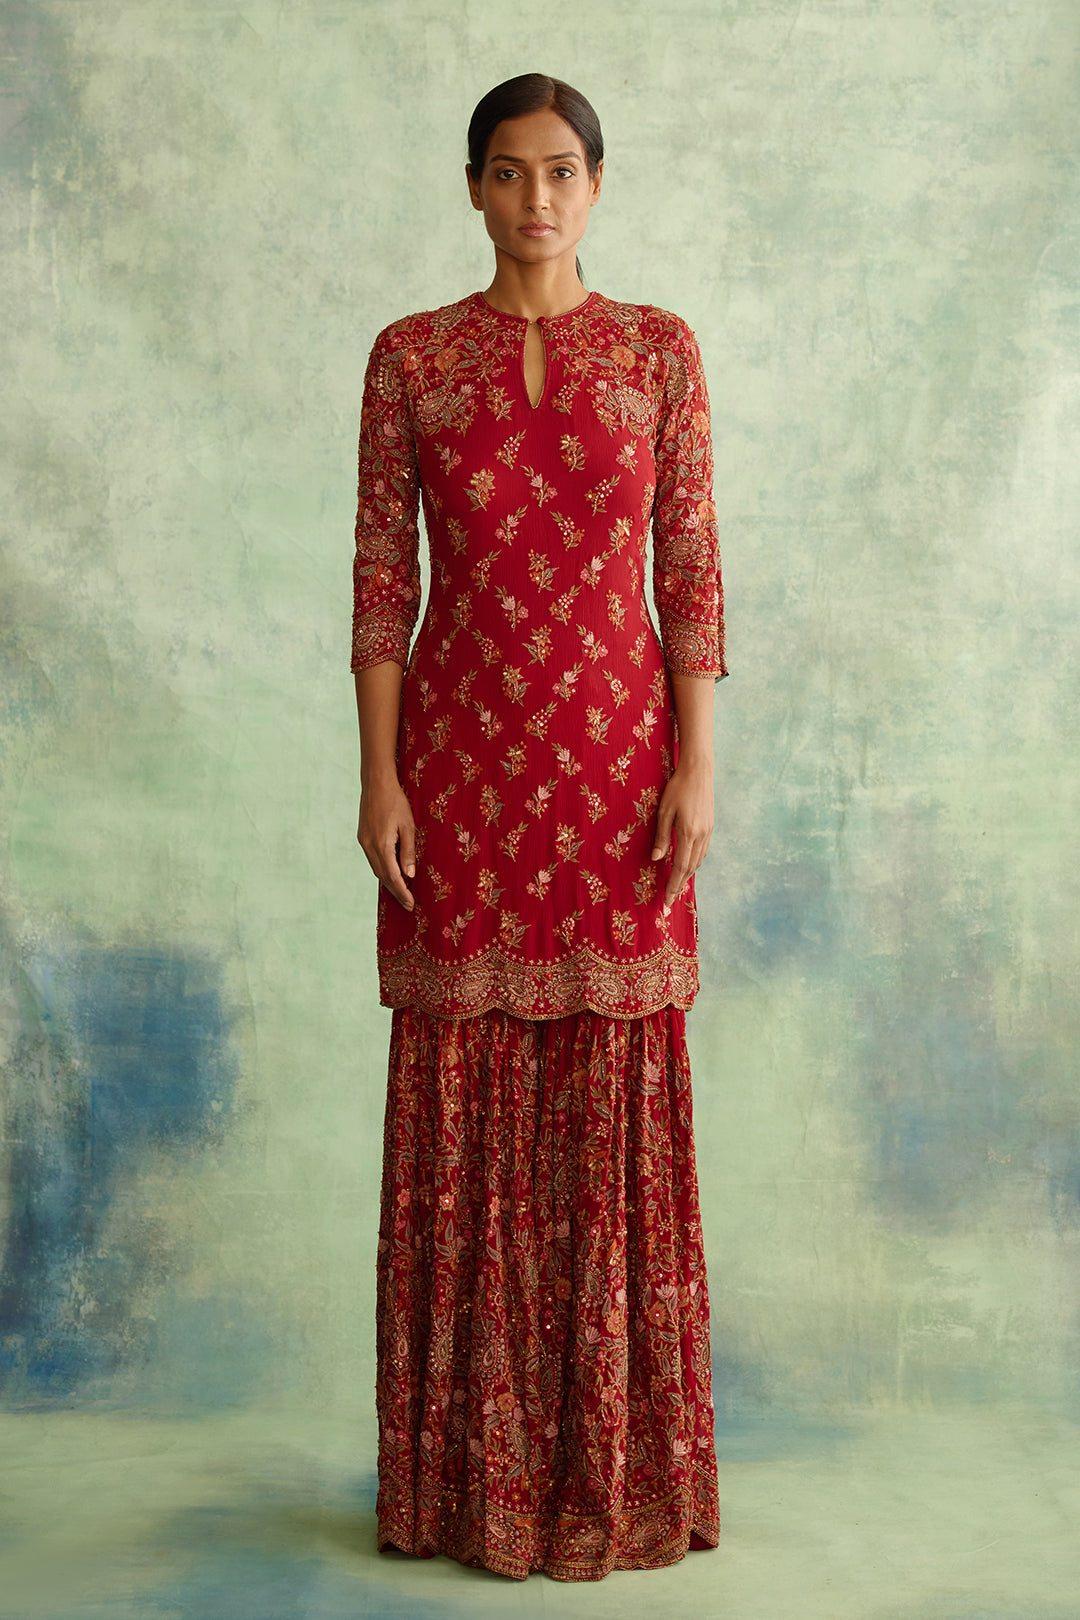 Gharara Set in Paisley Floral Thread Embroidery